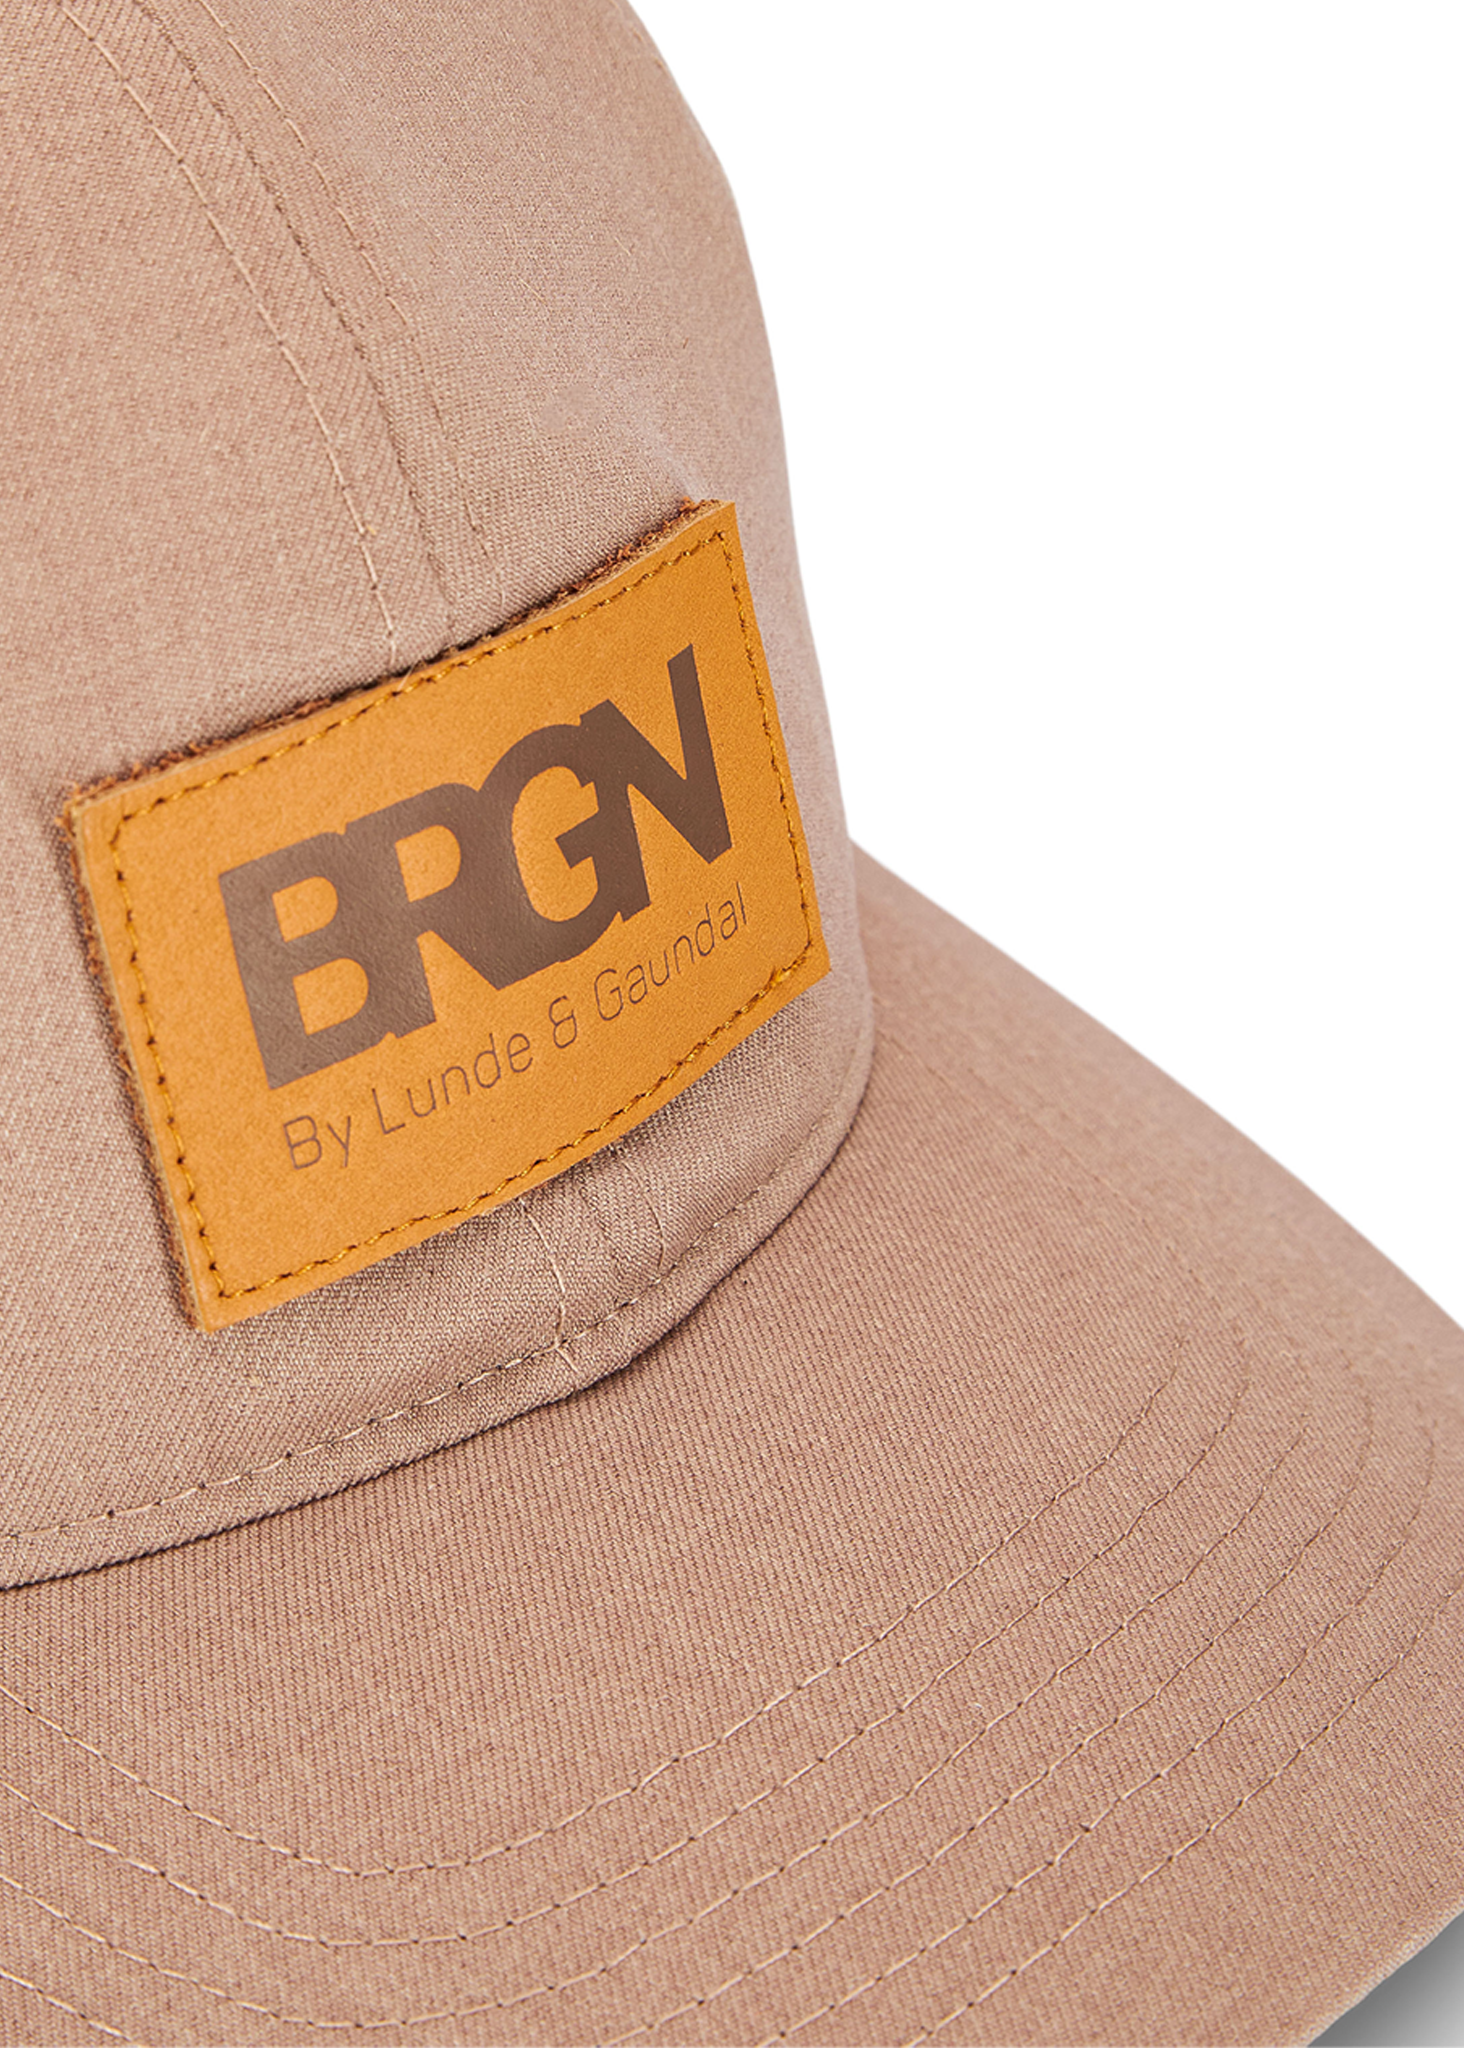 BRGN by Lunde & Gaundal Solregn caps Accessories 141 Taupe